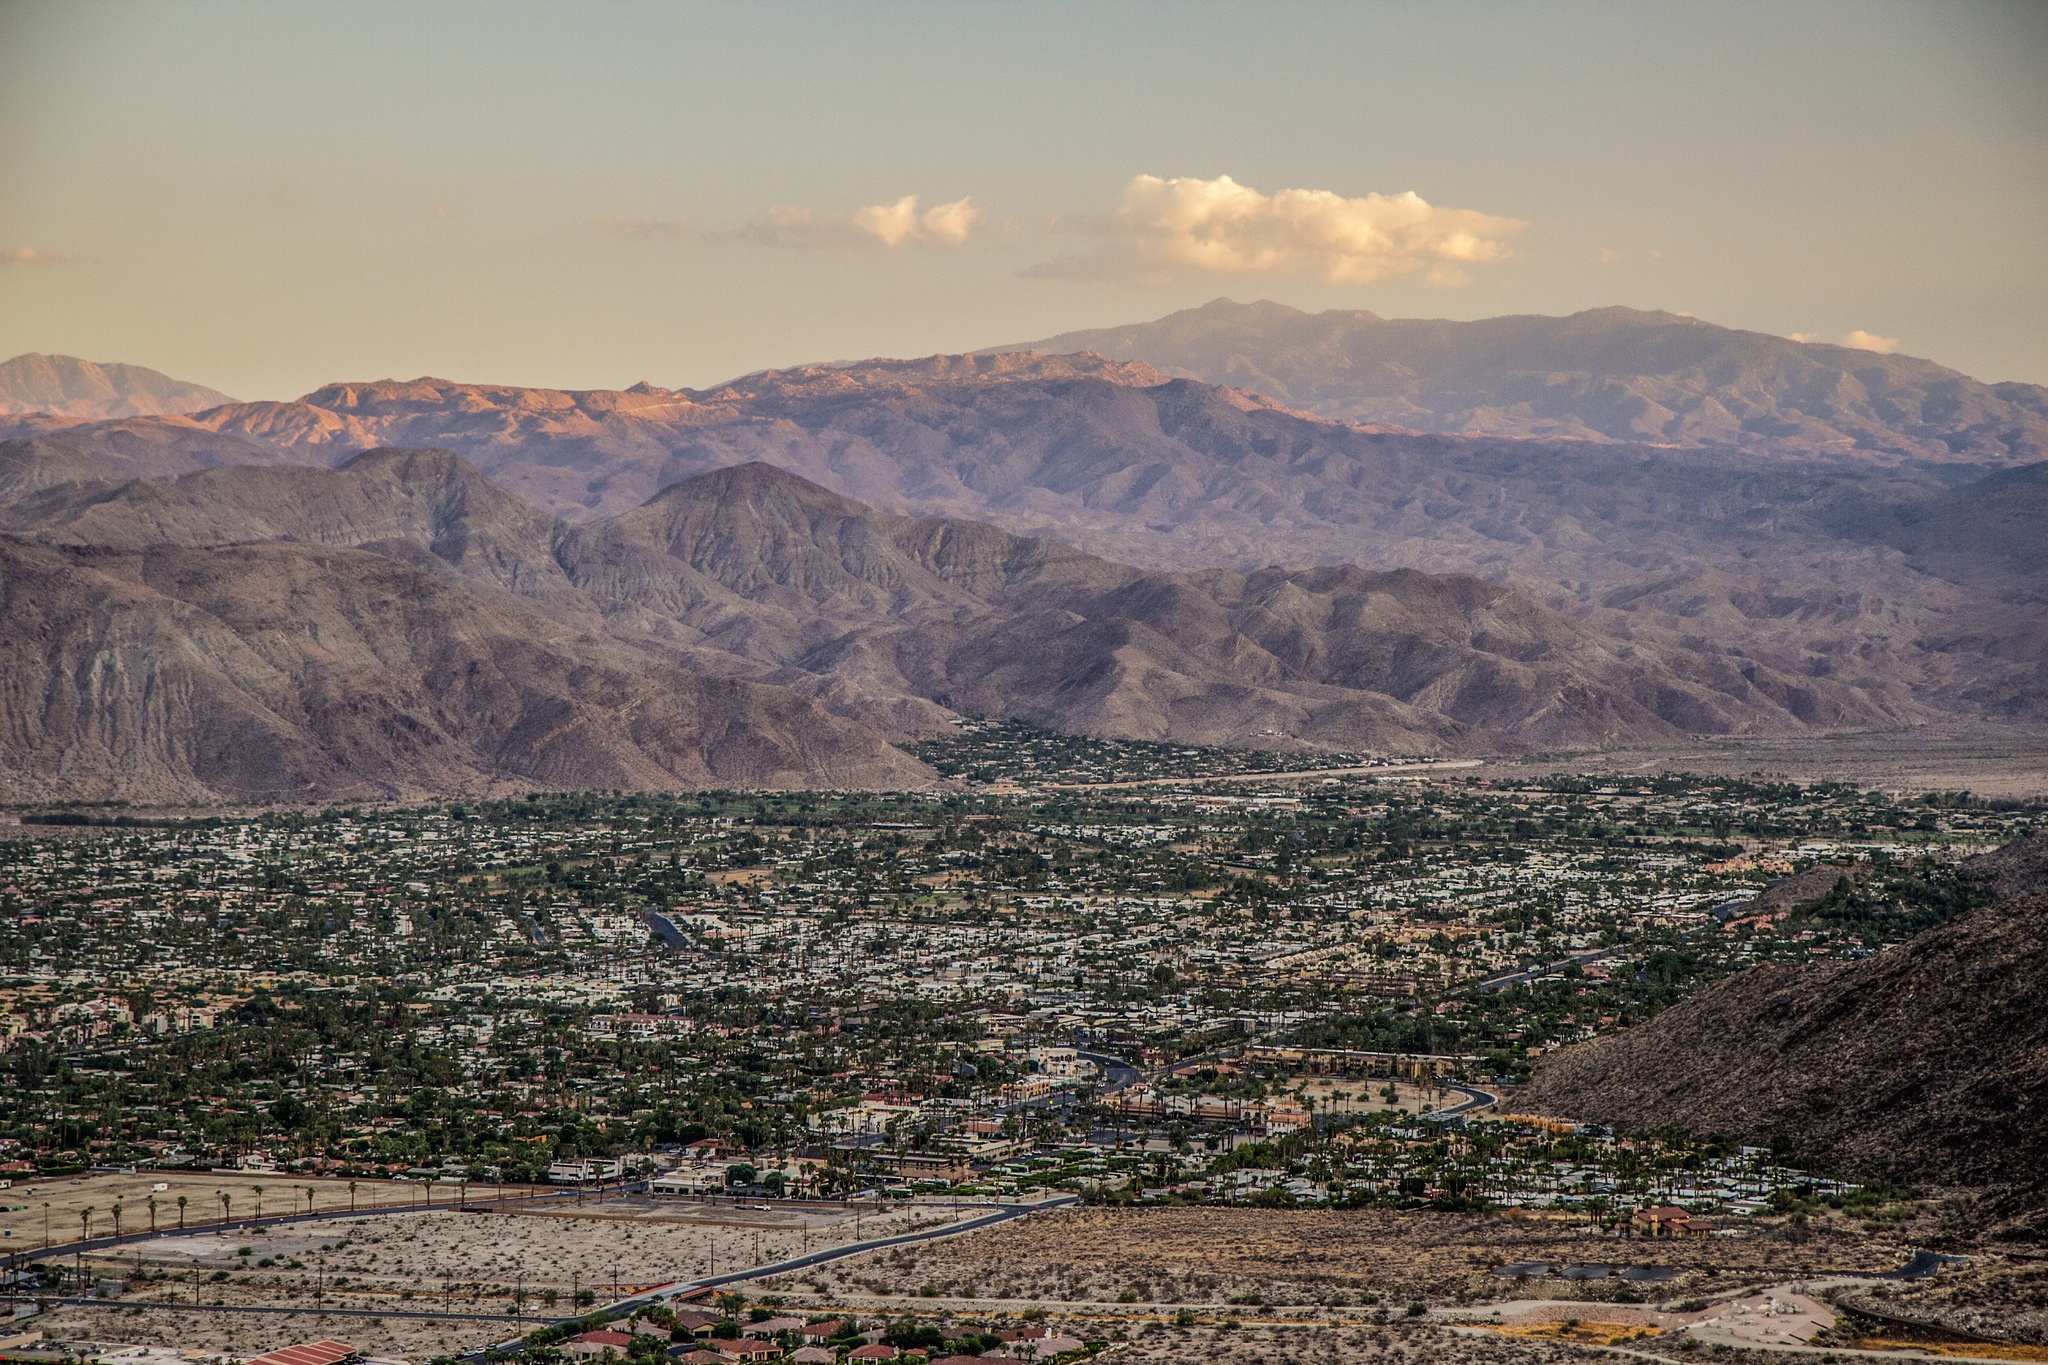 The Coachella Valley of Southern California is the site of a legal contest for groundwater rights. The Agua Caliente tribe won an important courtroom victory on March 7. Photo courtesy of Flickr/Creative Commons